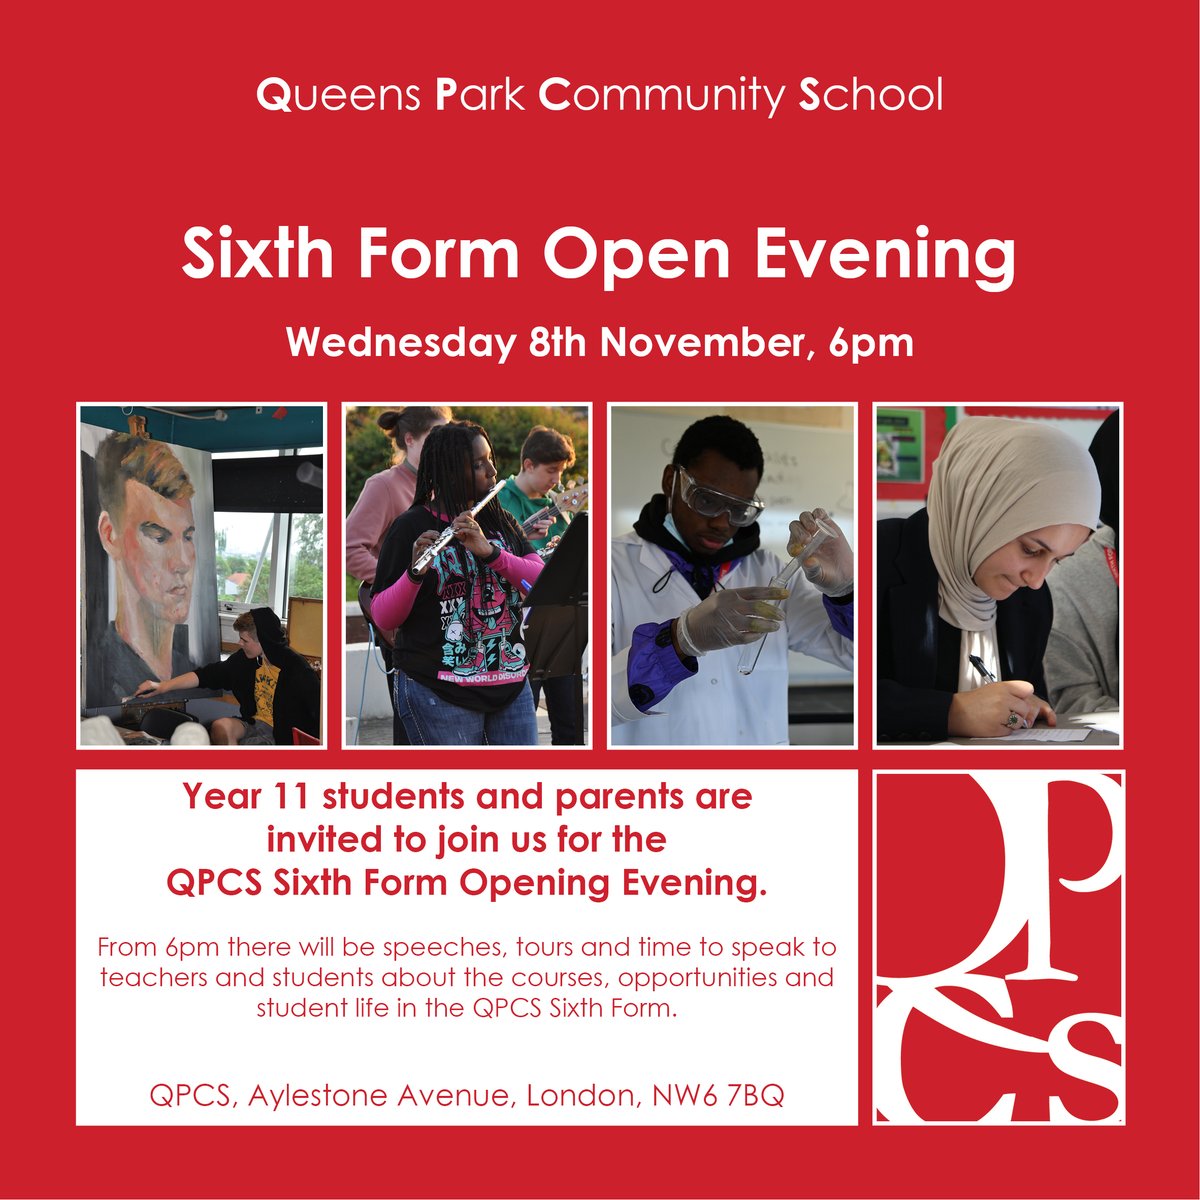 Please join us tomorrow for Sixth Form Open Evening.